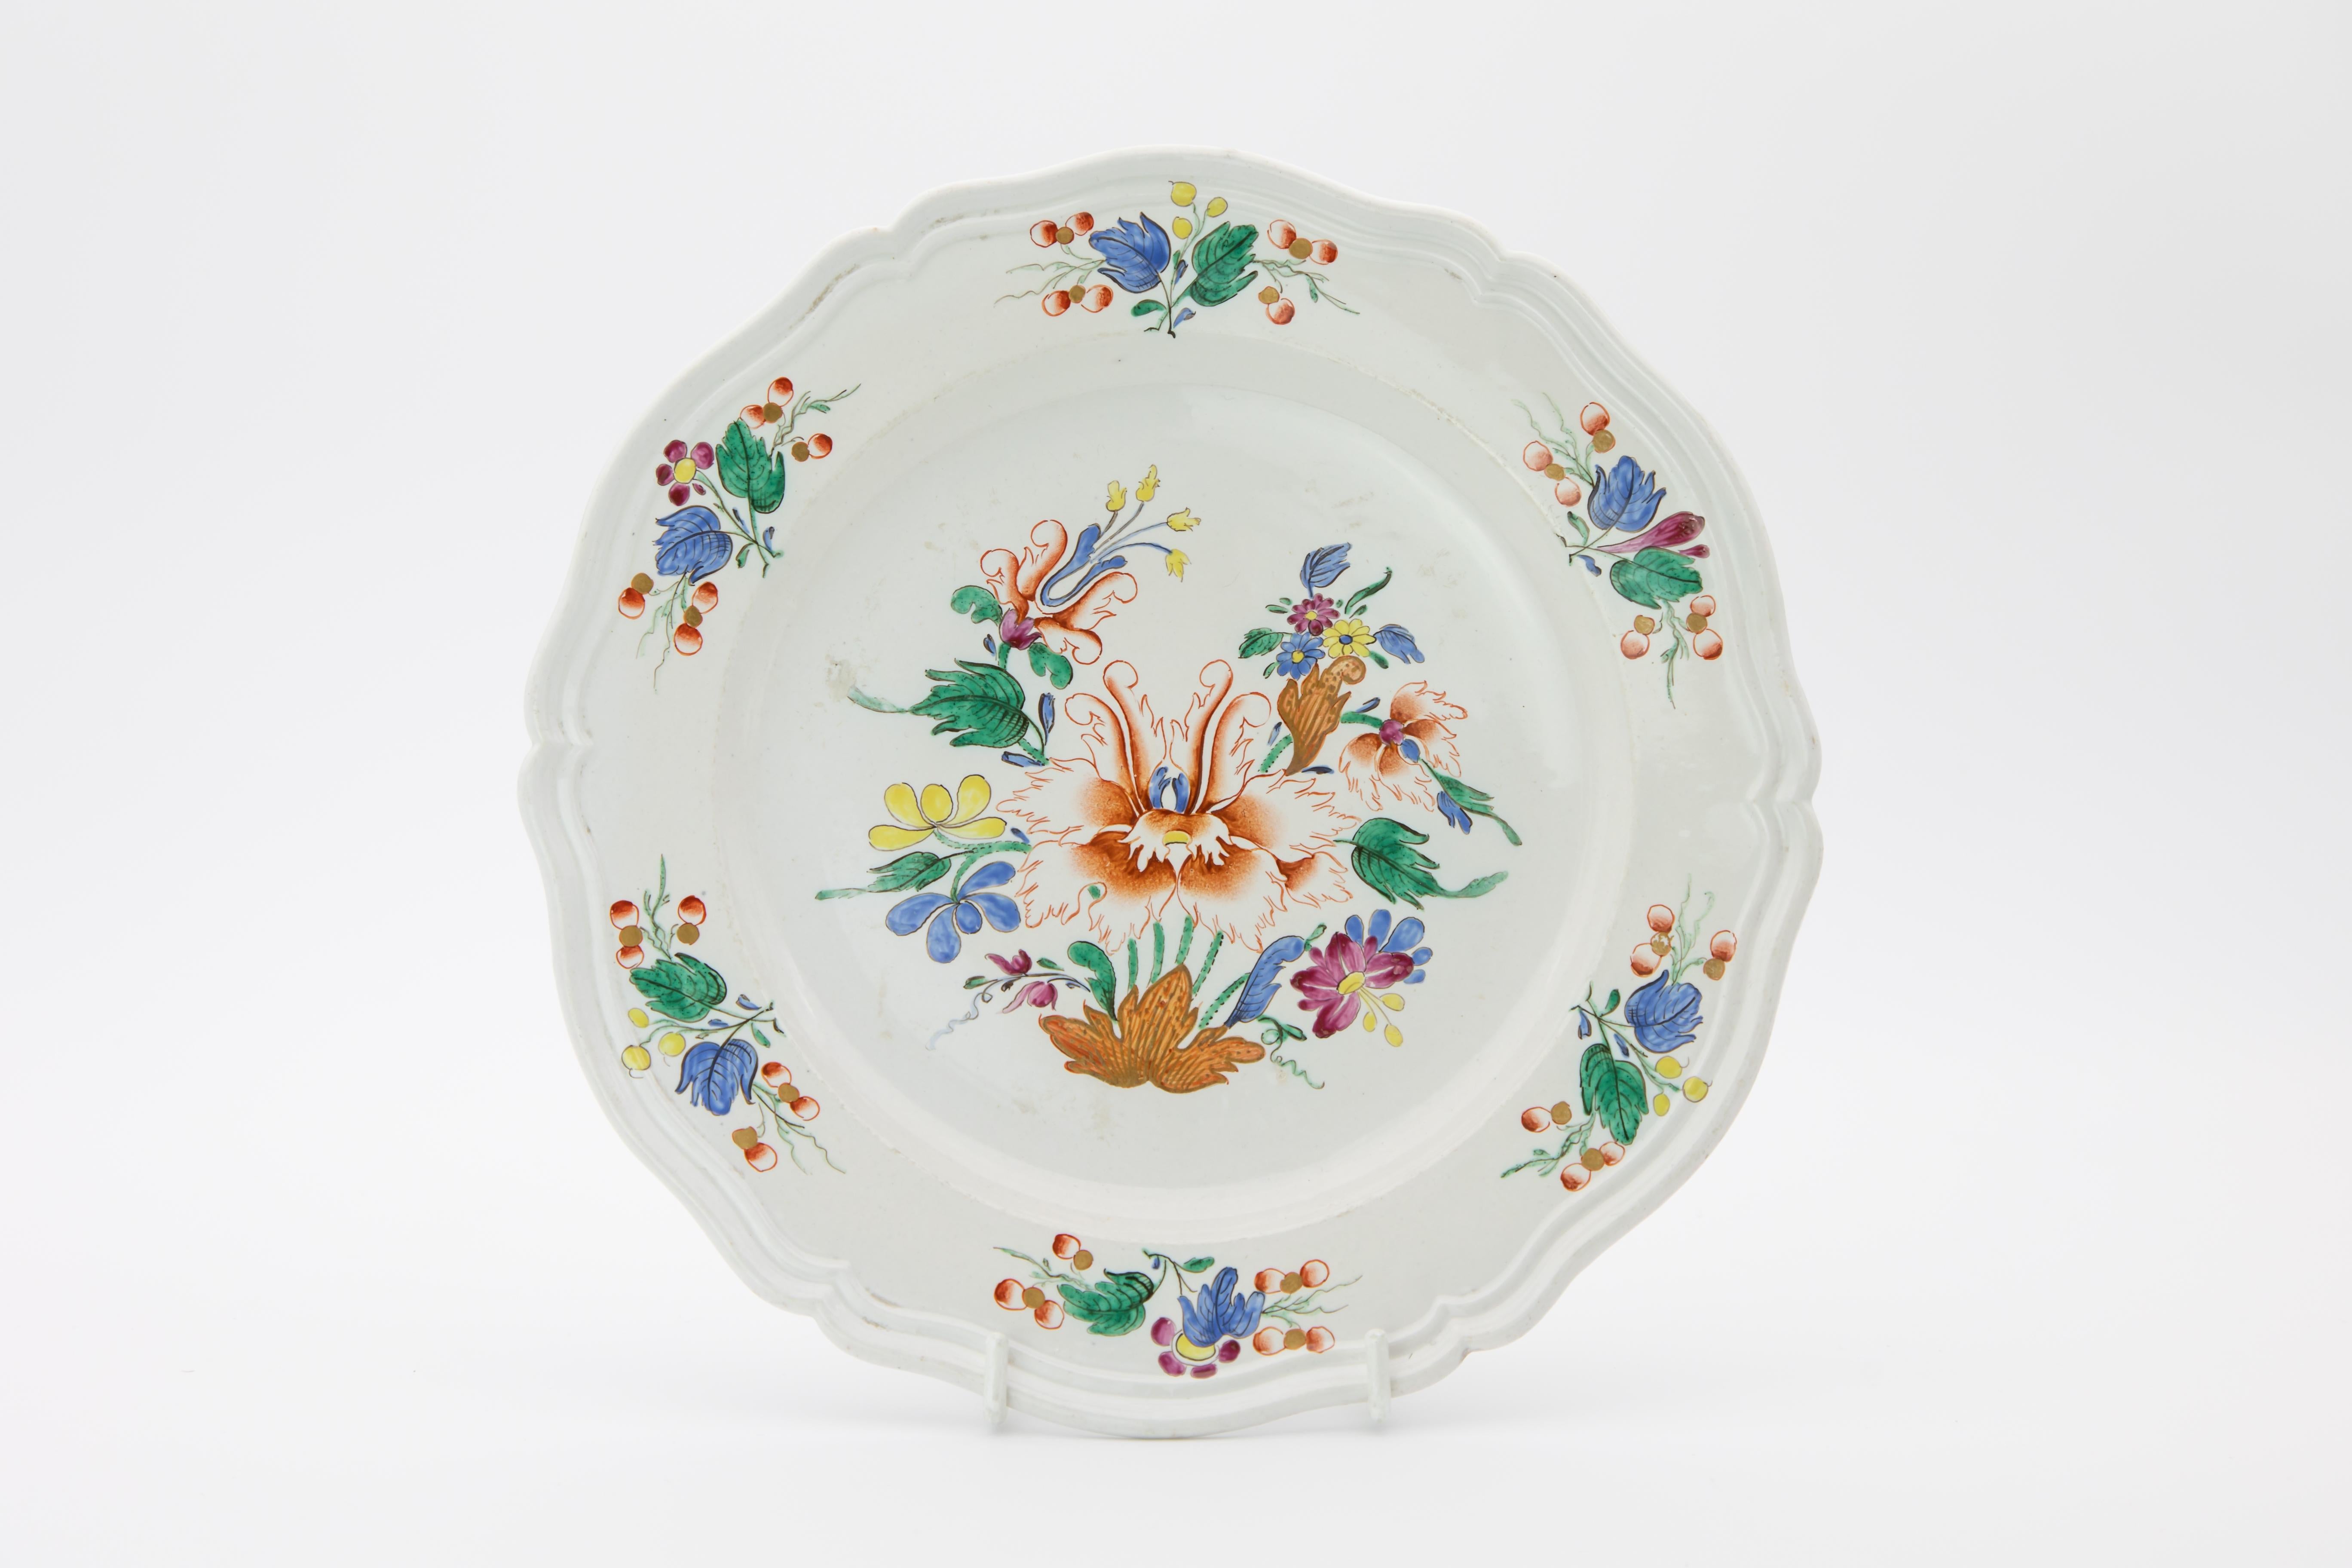 18th Century Italian Doccia Porcelain Dinner Service In Good Condition For Sale In Fort Lauderdale, FL